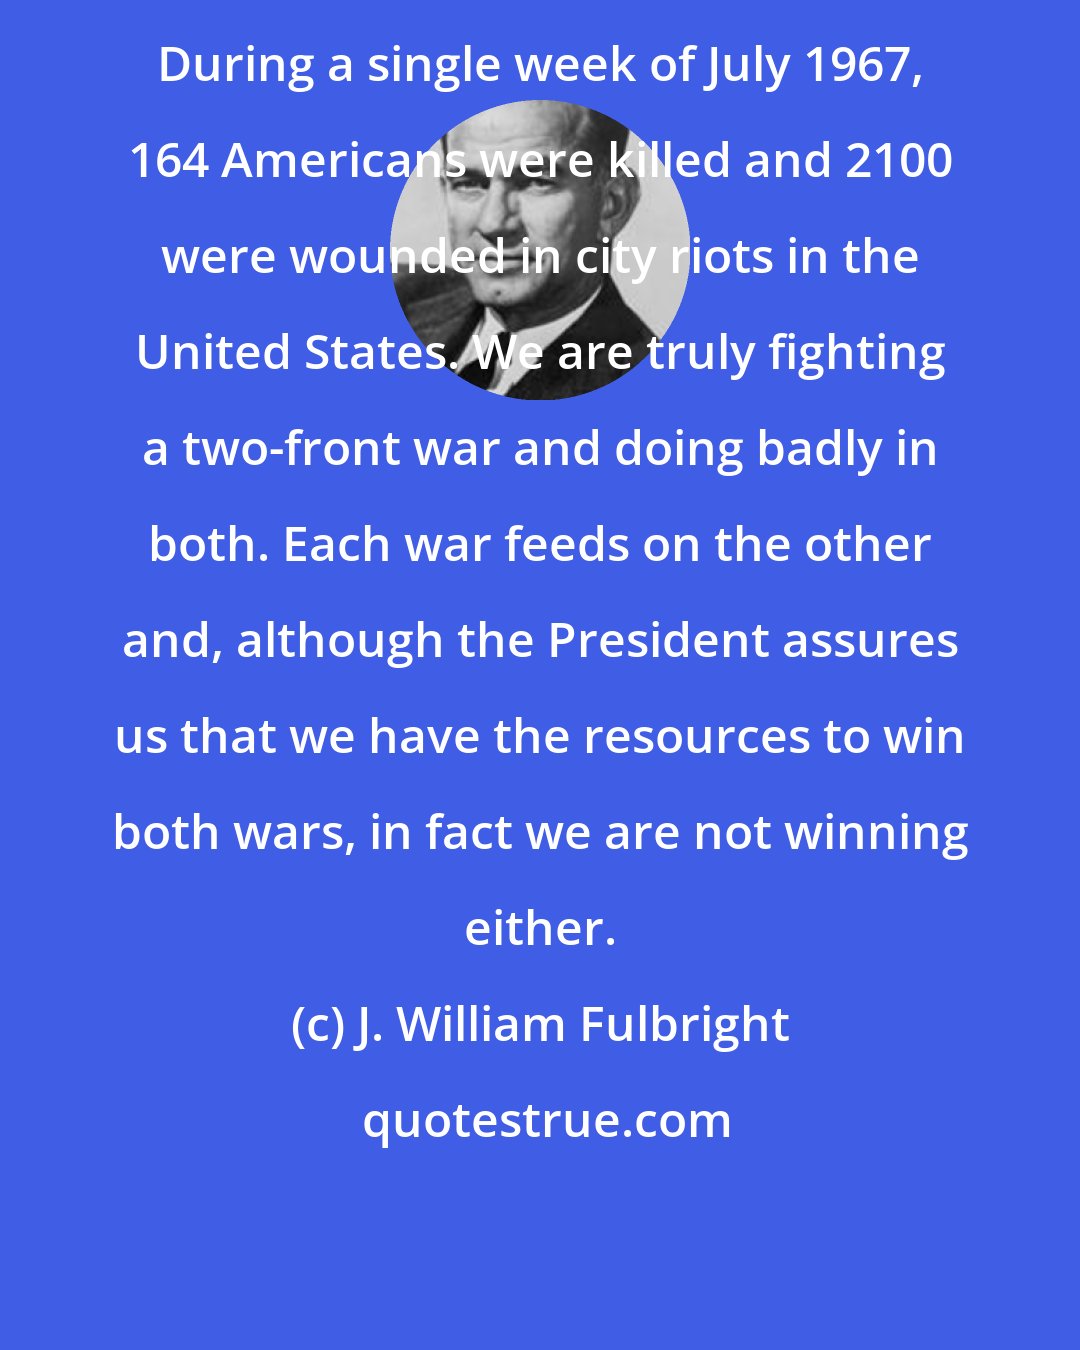 J. William Fulbright: During a single week of July 1967, 164 Americans were killed and 2100 were wounded in city riots in the United States. We are truly fighting a two-front war and doing badly in both. Each war feeds on the other and, although the President assures us that we have the resources to win both wars, in fact we are not winning either.